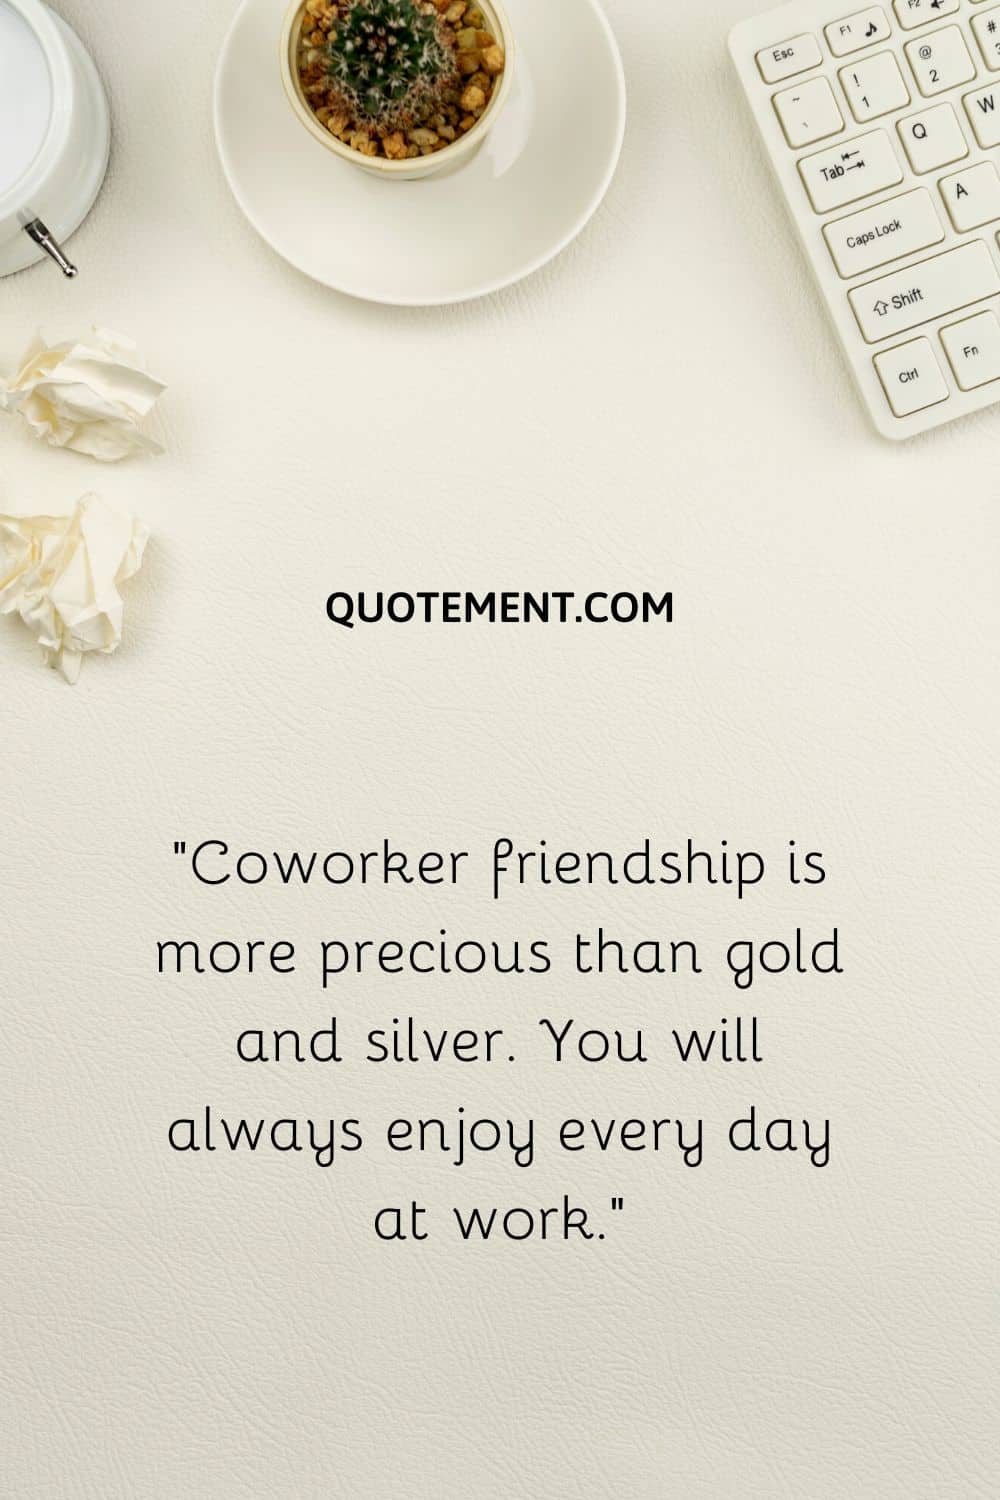 “Coworker friendship is more precious than gold and silver. You will always enjoy every day at work.”